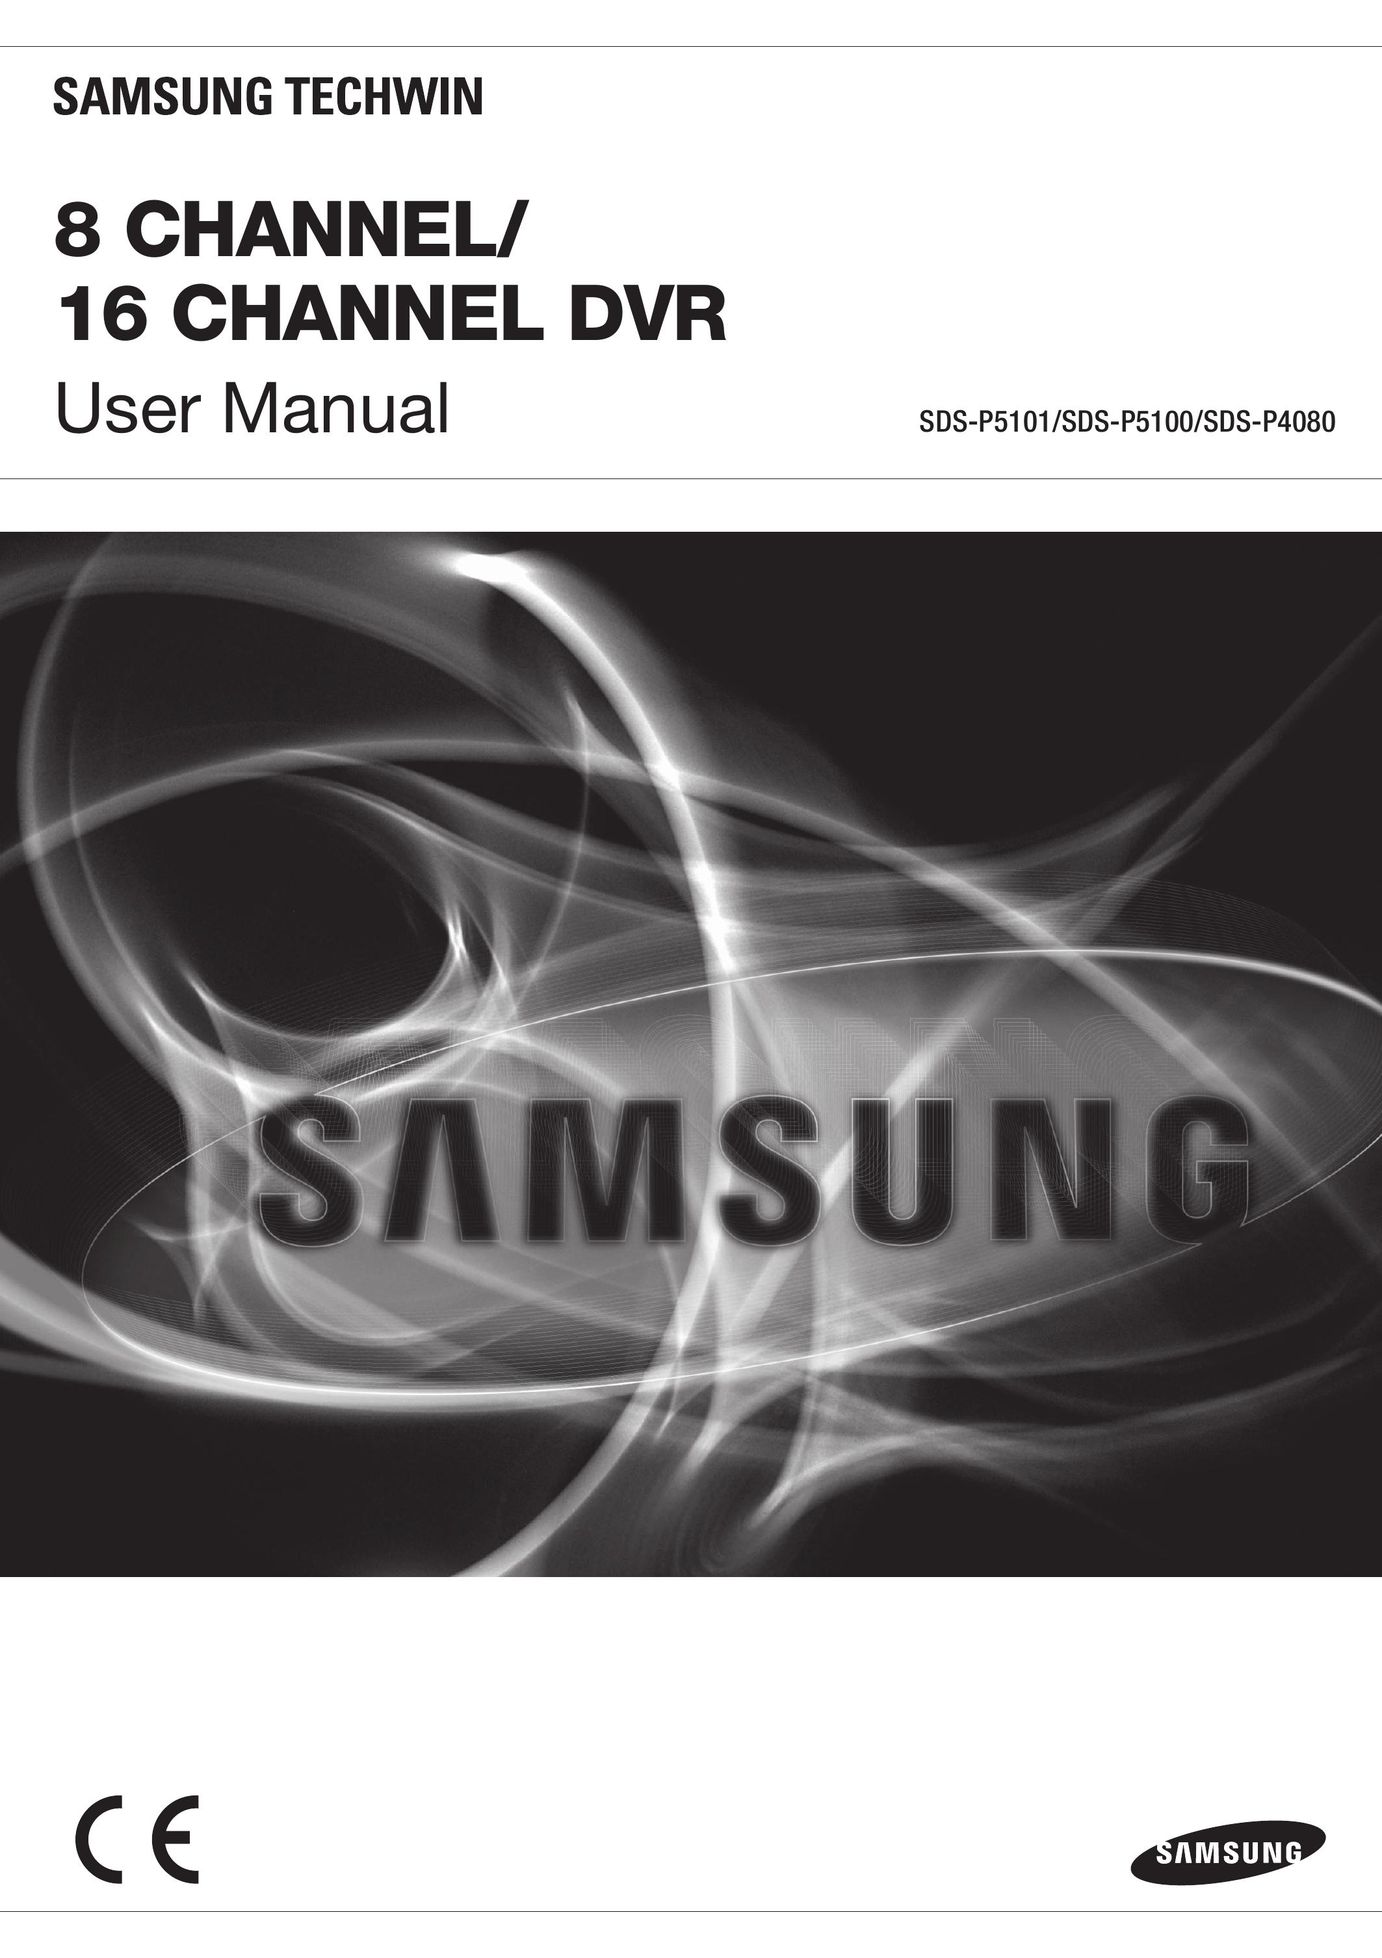 Samsung SDR5100 TV Video Accessories User Manual